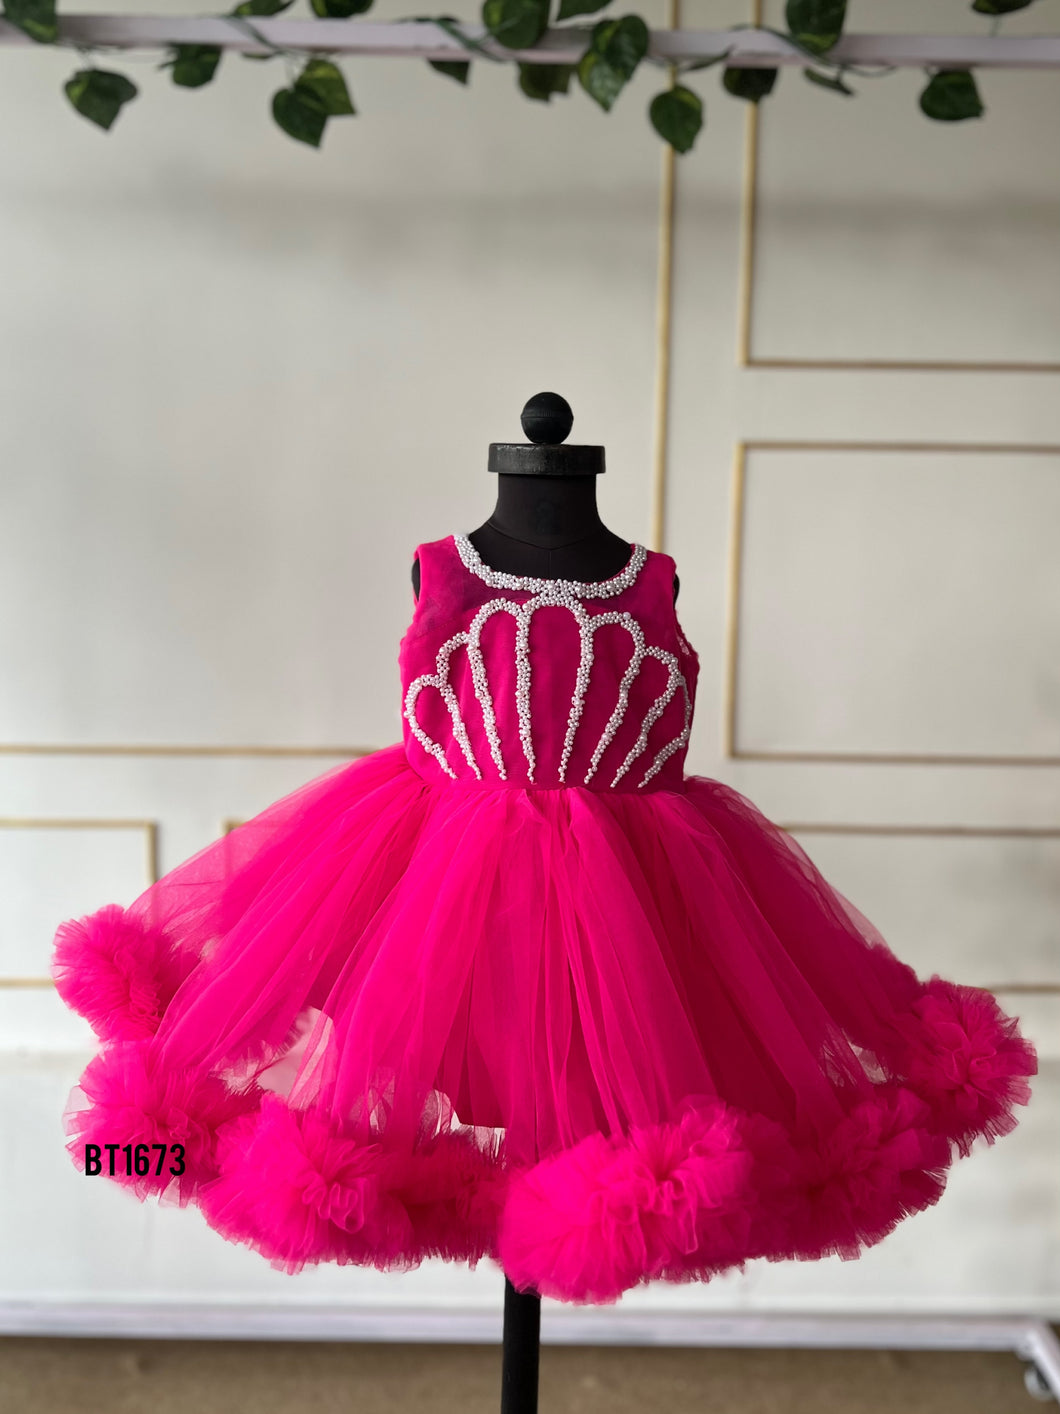 BT1673 Fuchsia Fantasy Gown - Dazzling Moments for Your Little Princess